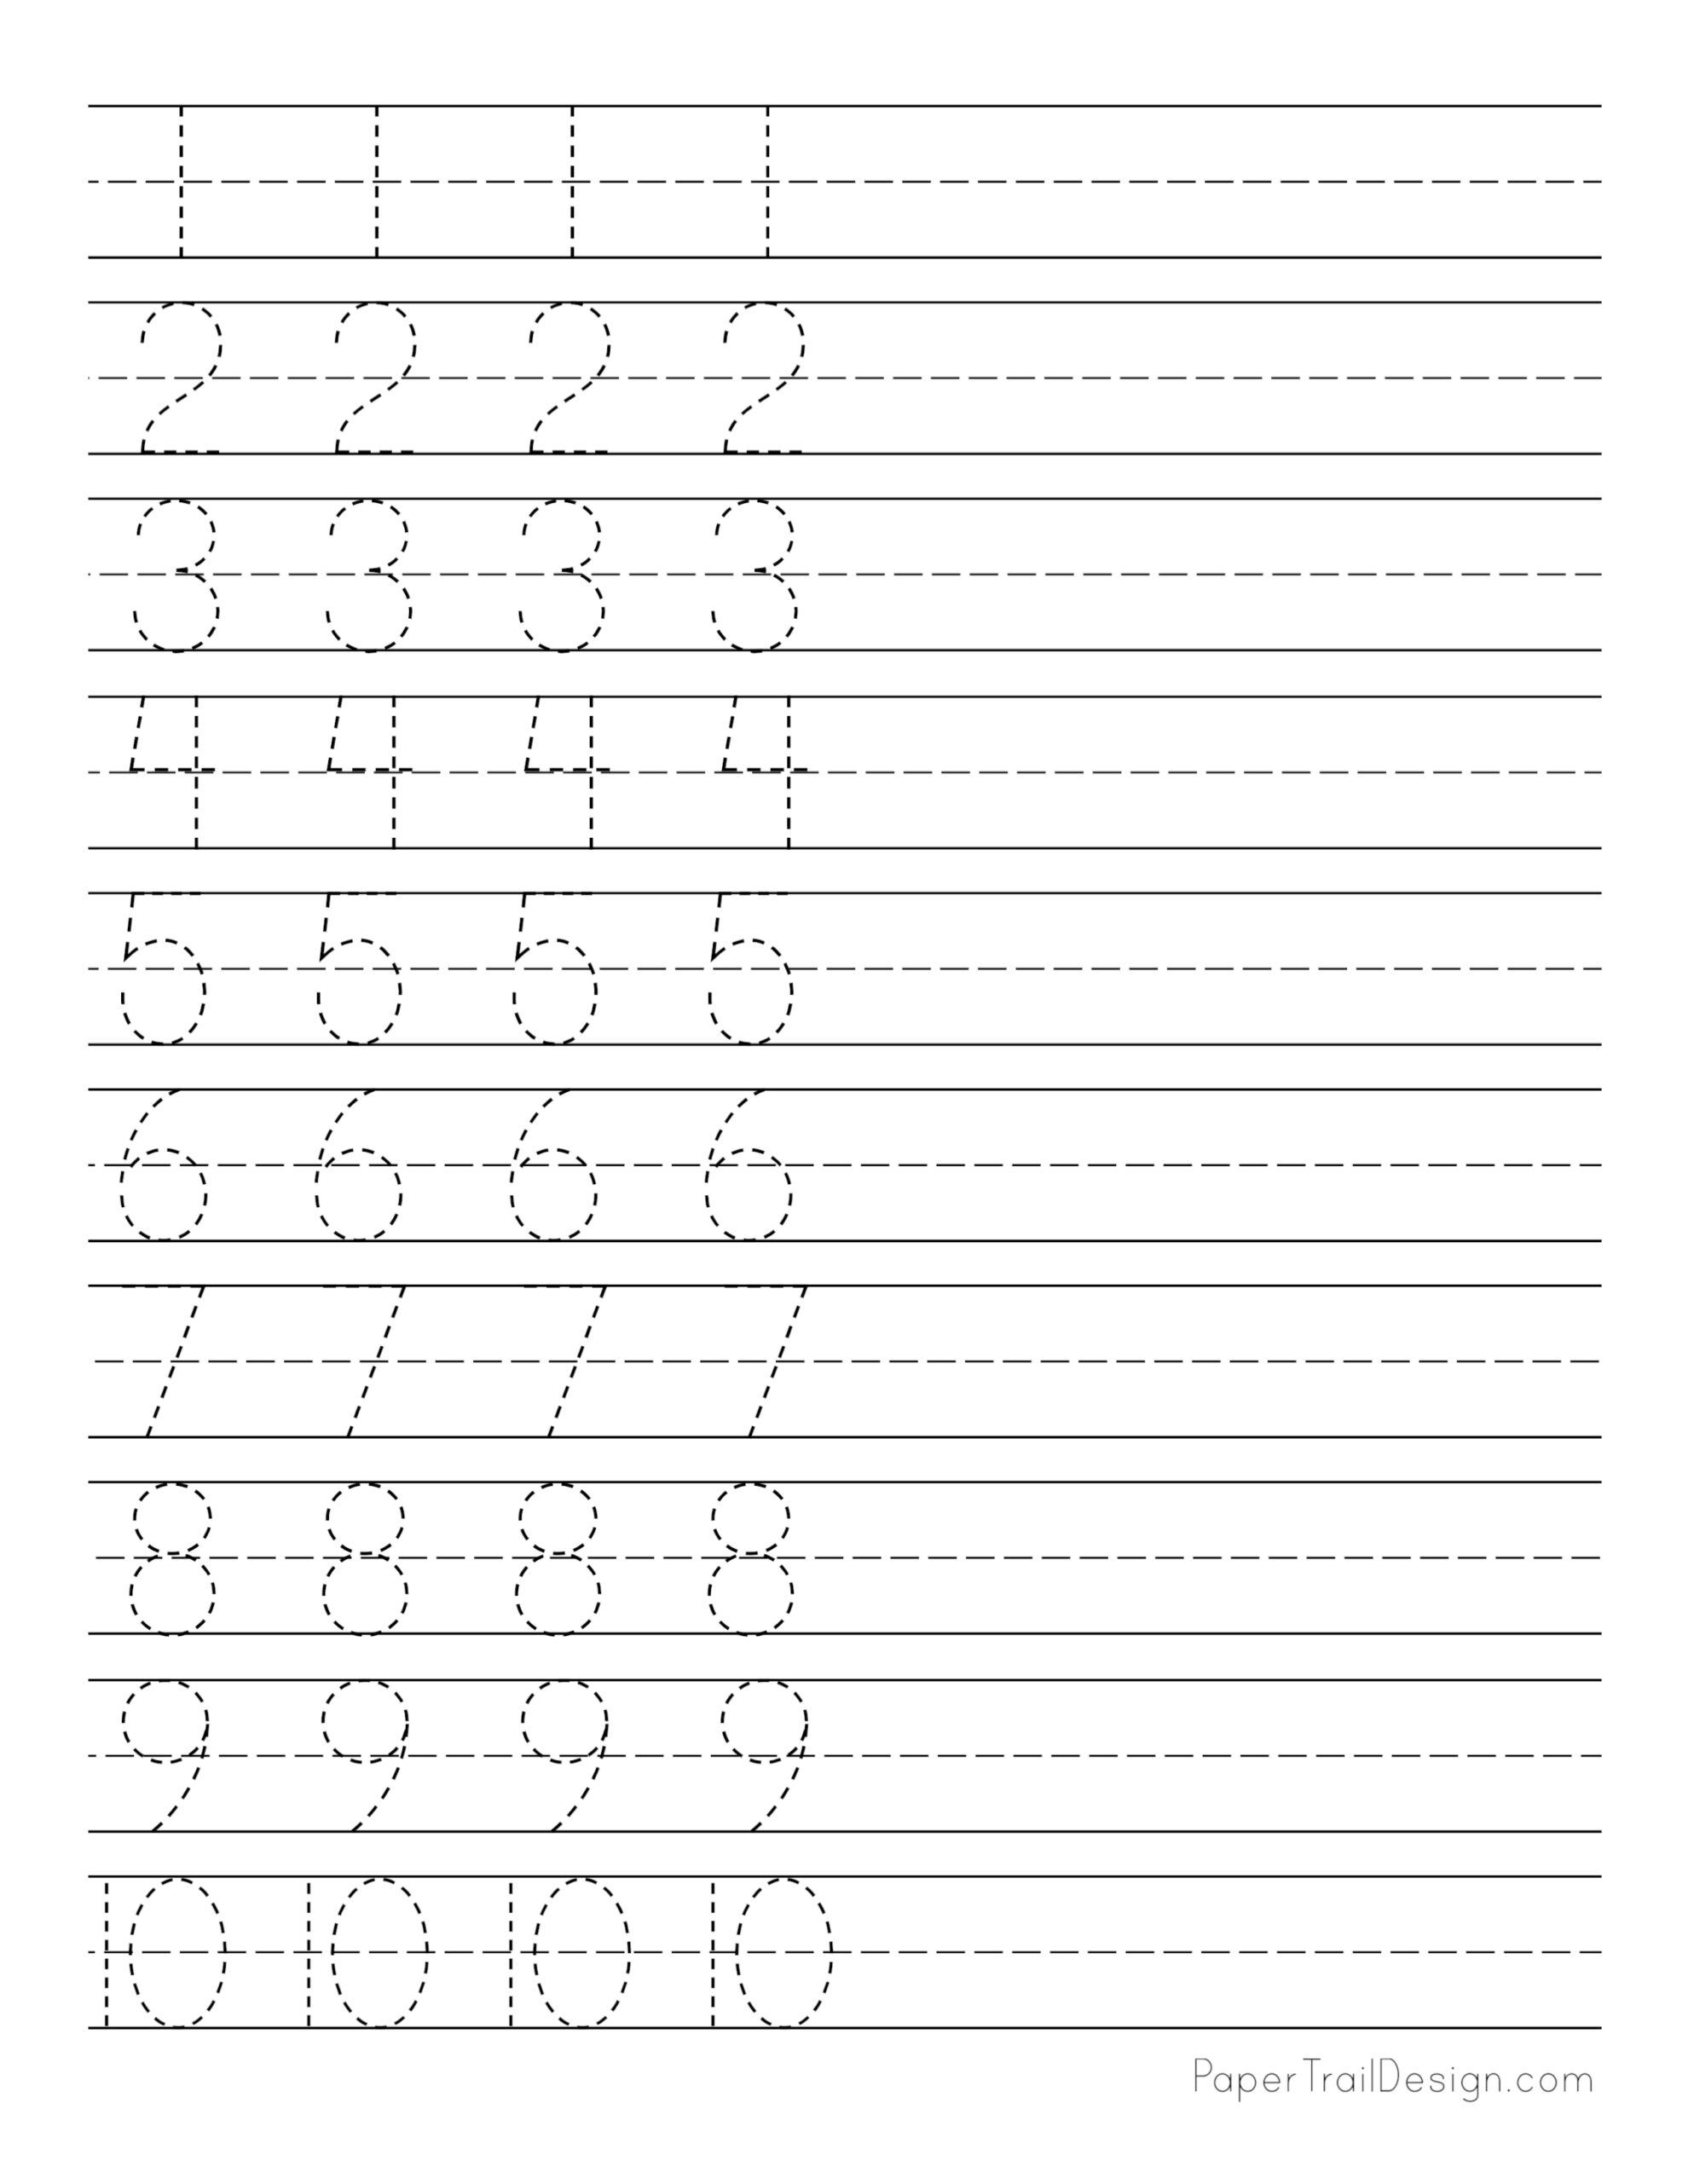 Free Number Tracing Worksheets | Paper Trail Design